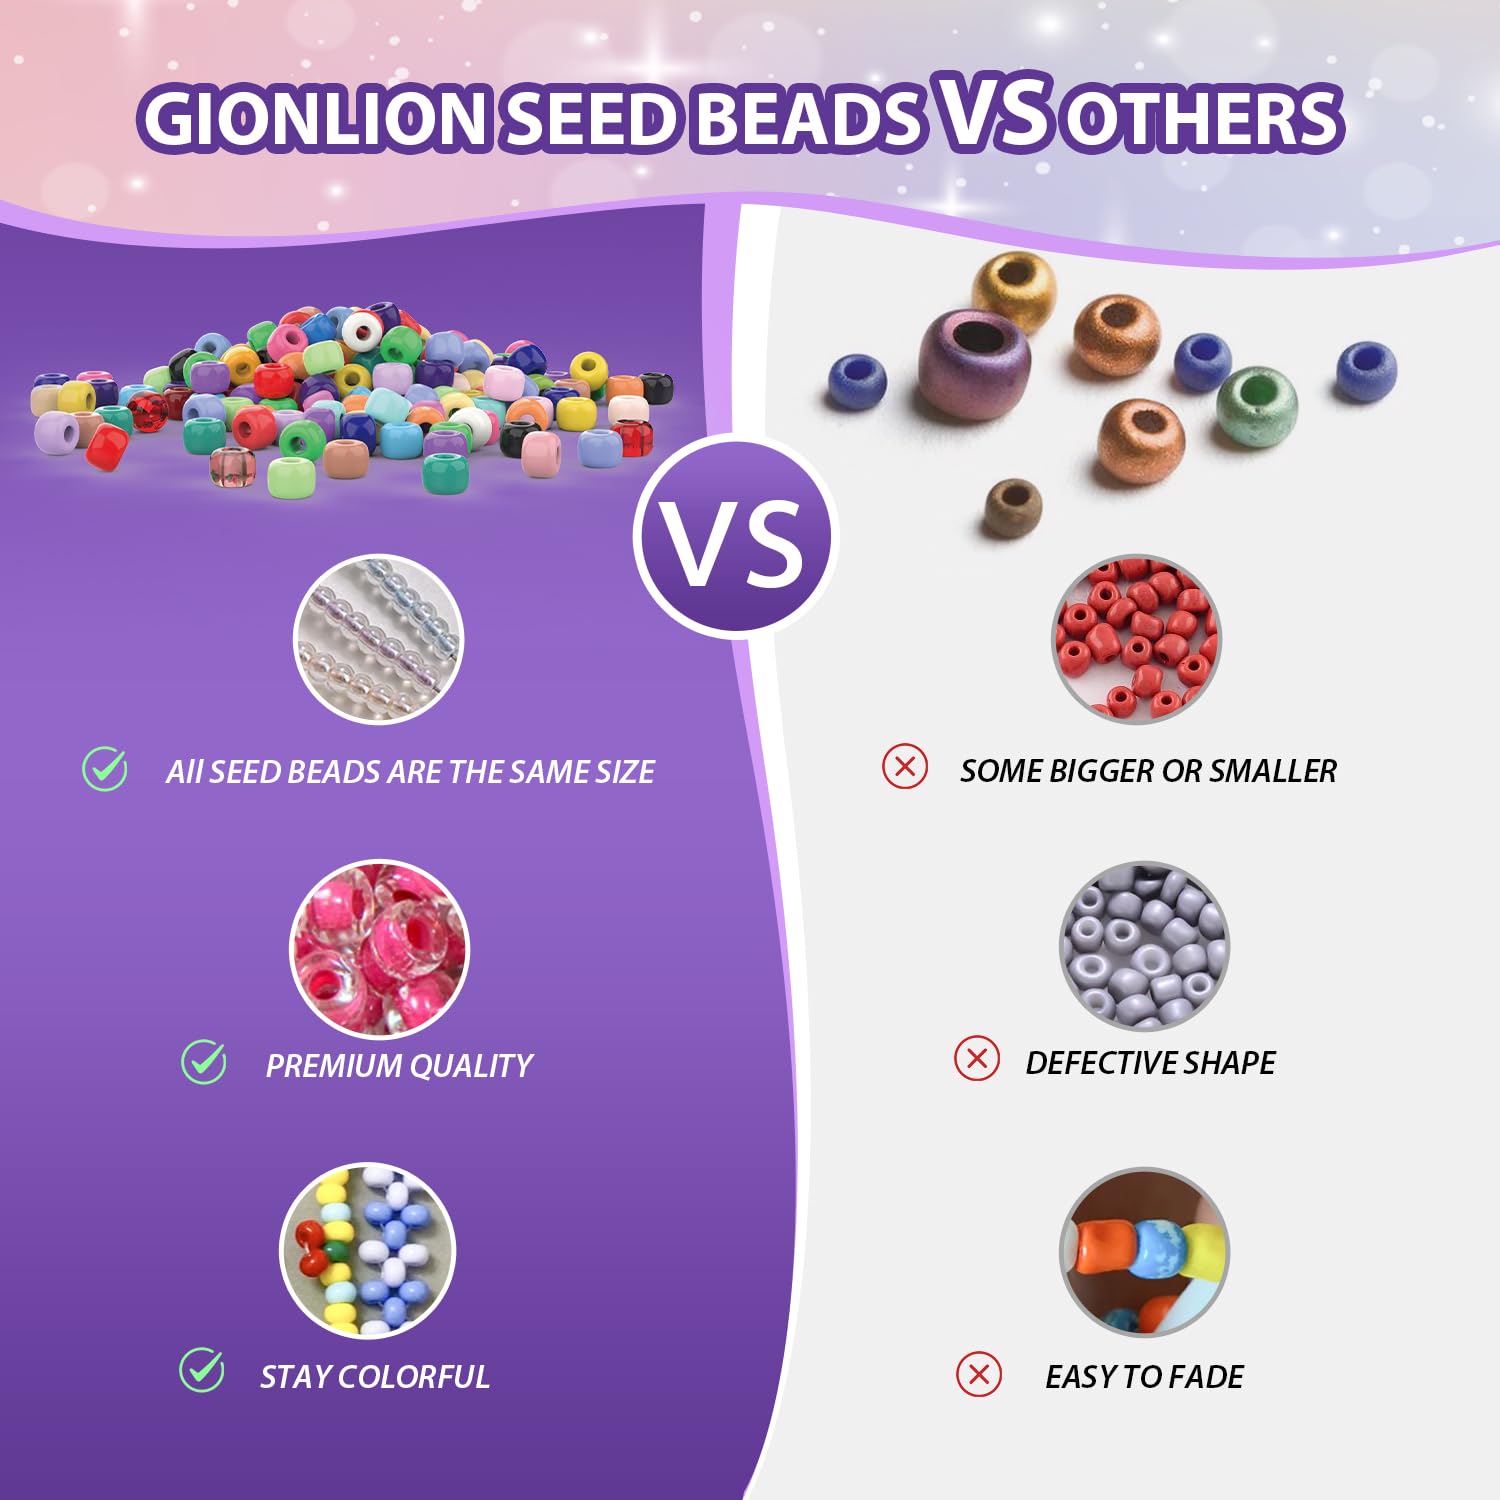 Gionlion 4000 Pcs 4mm Glass Seed Beads for Jewelry Making,24 Colors Seed Beads Friendship Preppy Bracelet Making Kit with Letter Beads Charms Kit and Elastic Strings